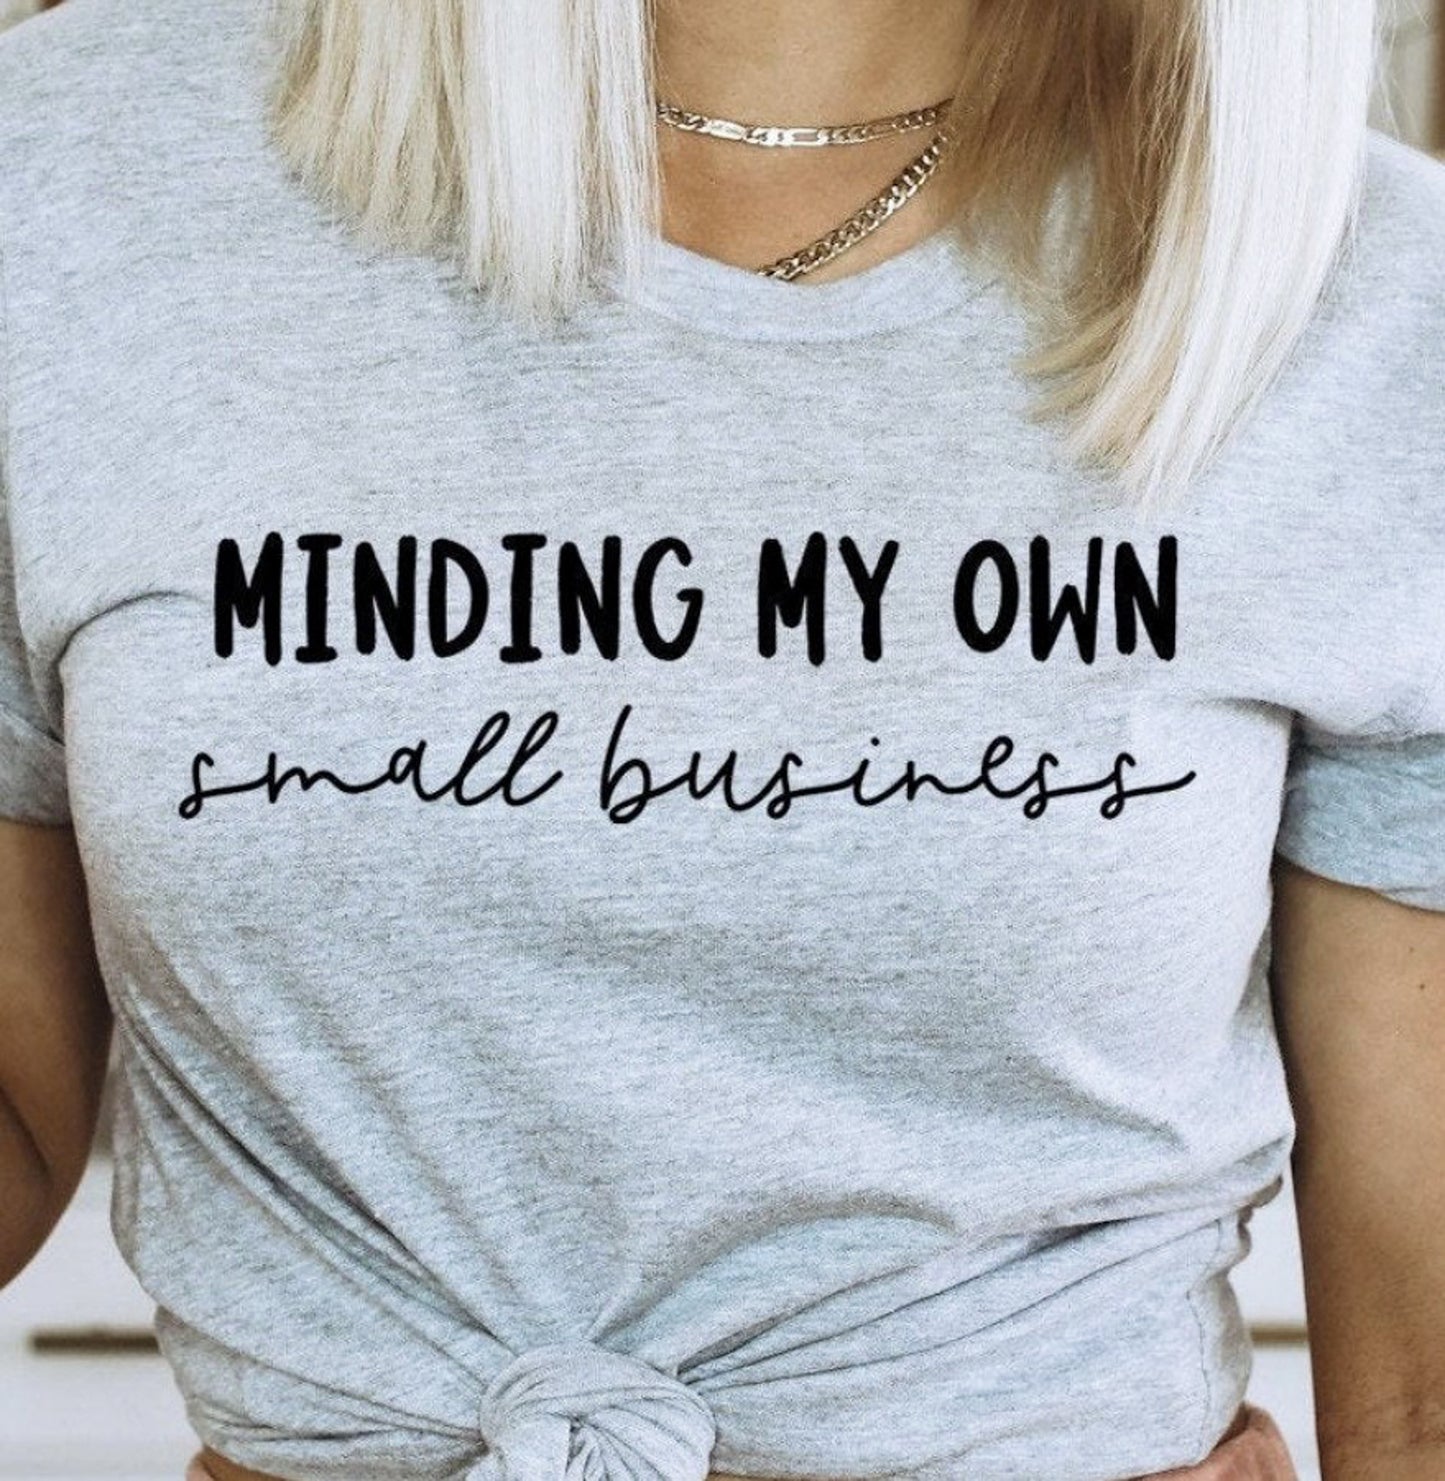 Minding My Own Small Business Tee